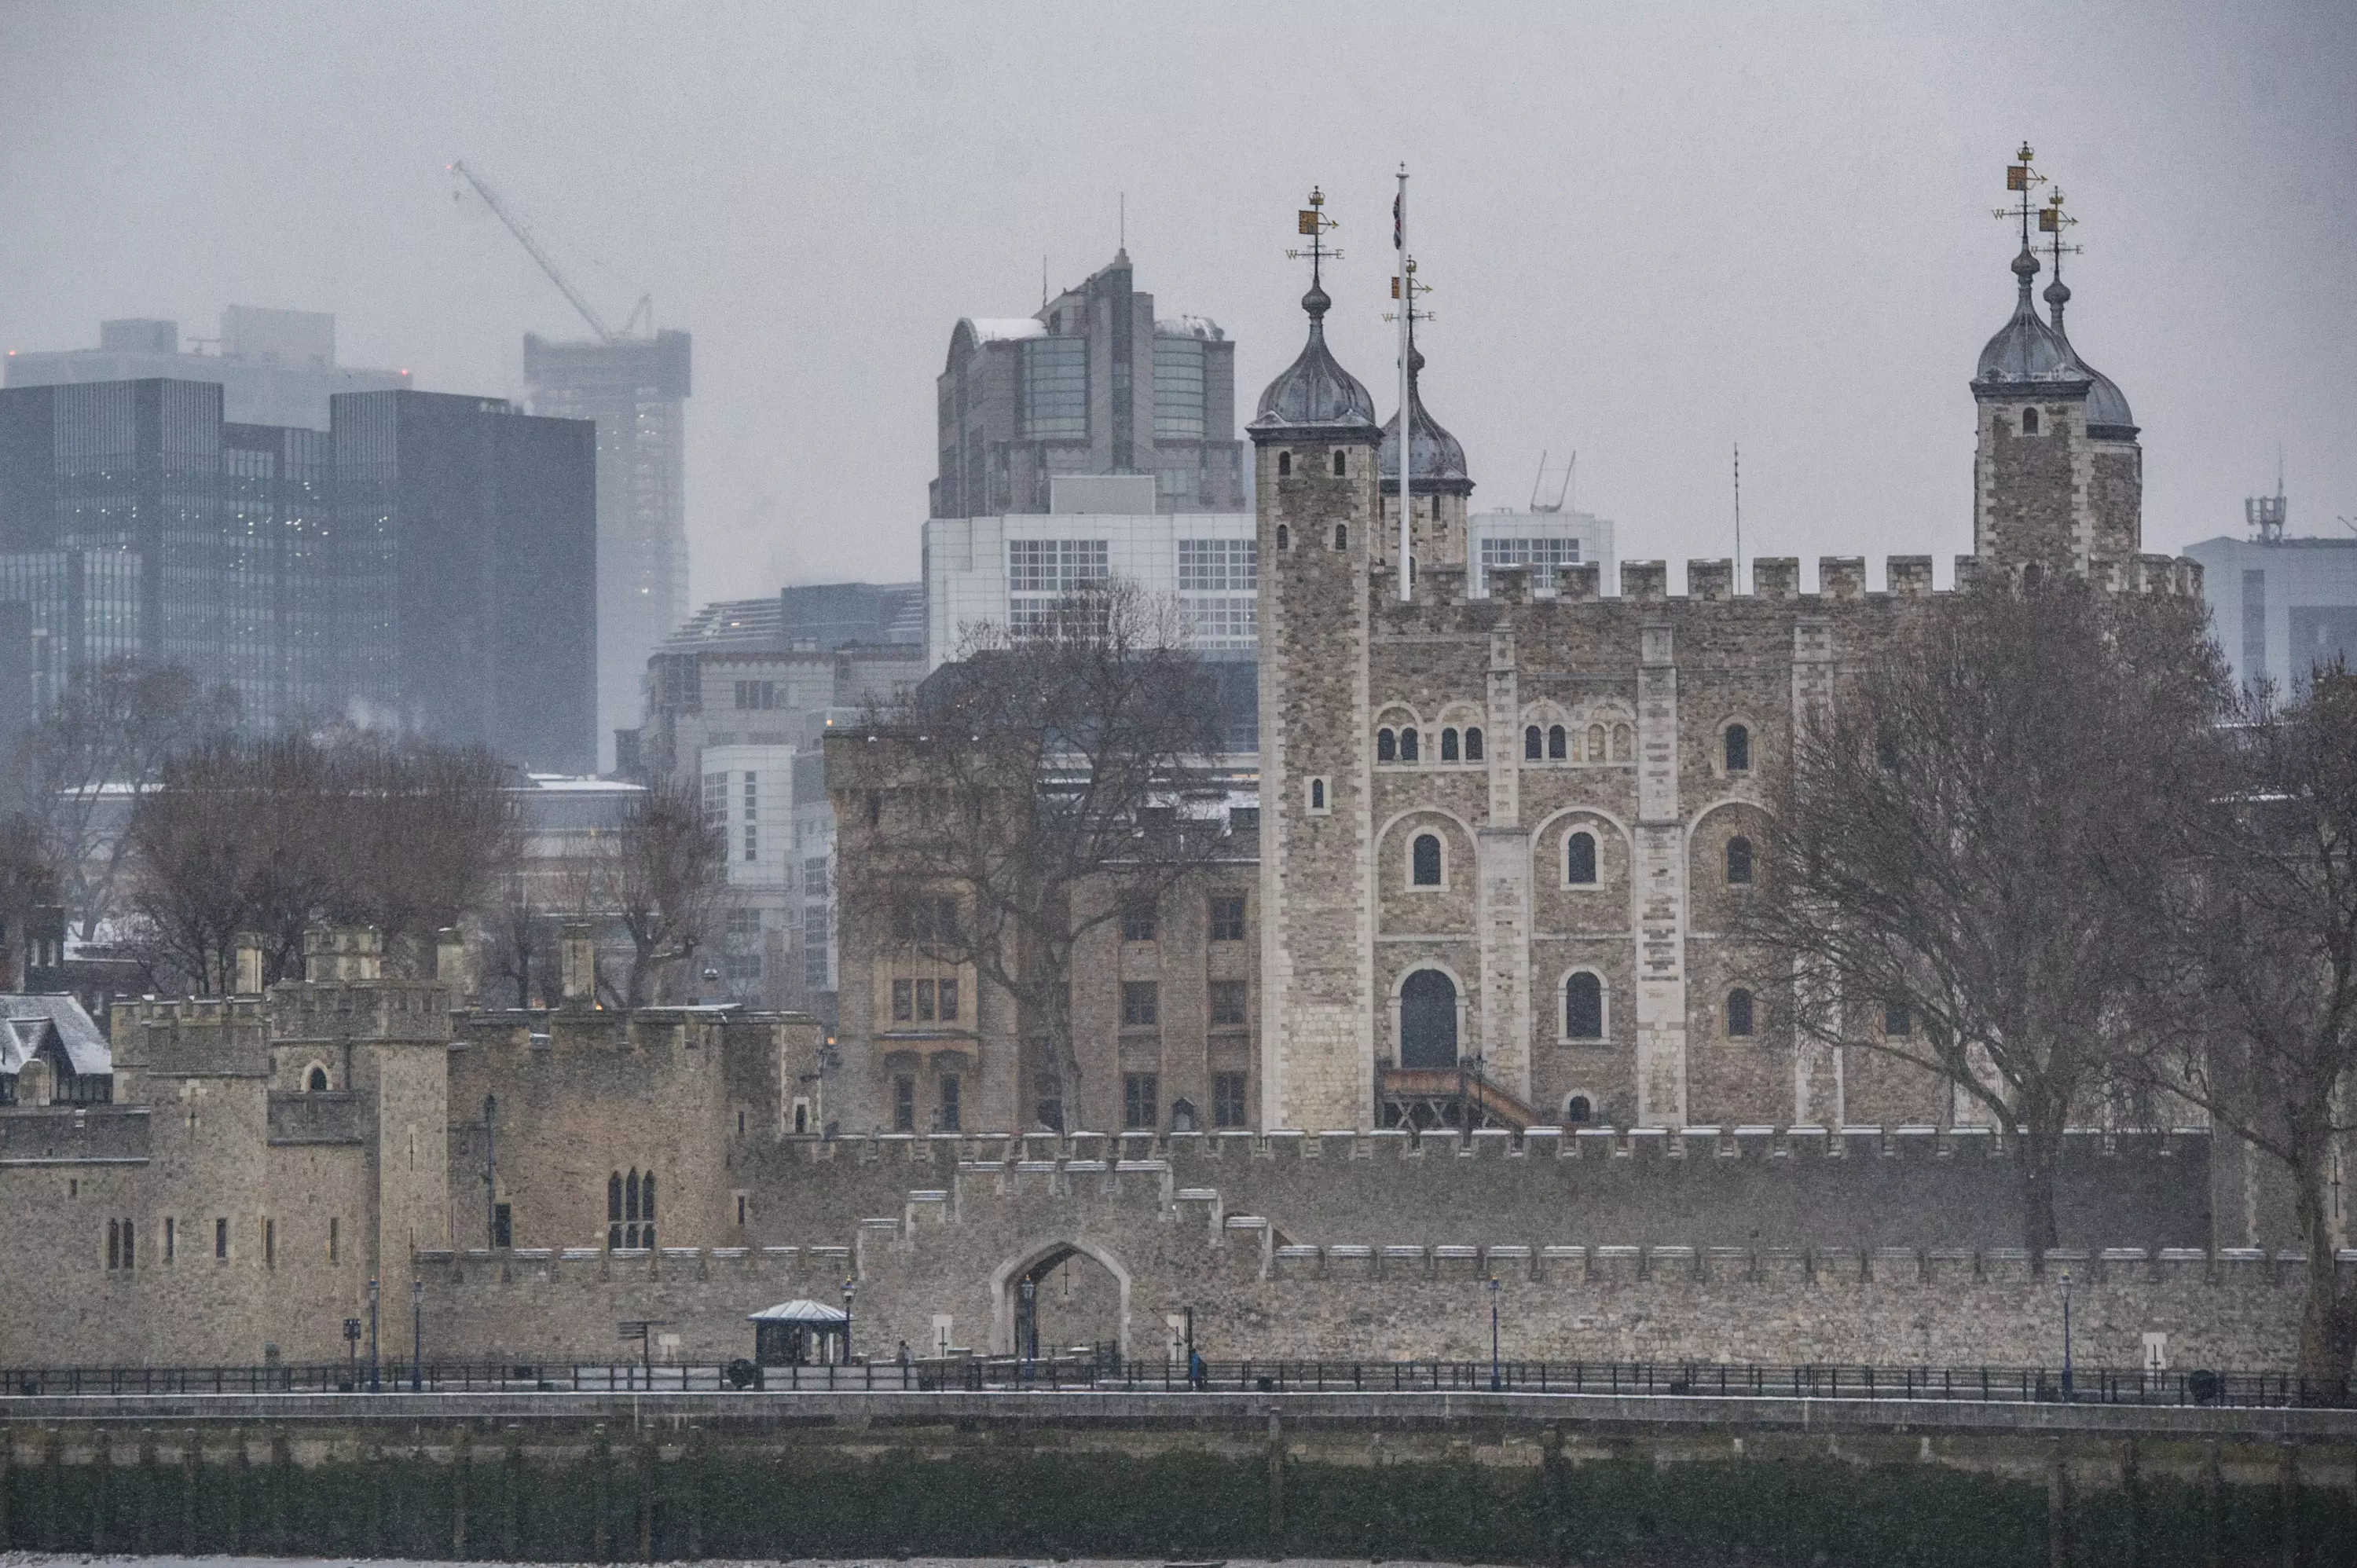 The Tower of London has more tourists than Anfield, but only just. Image: PA Images